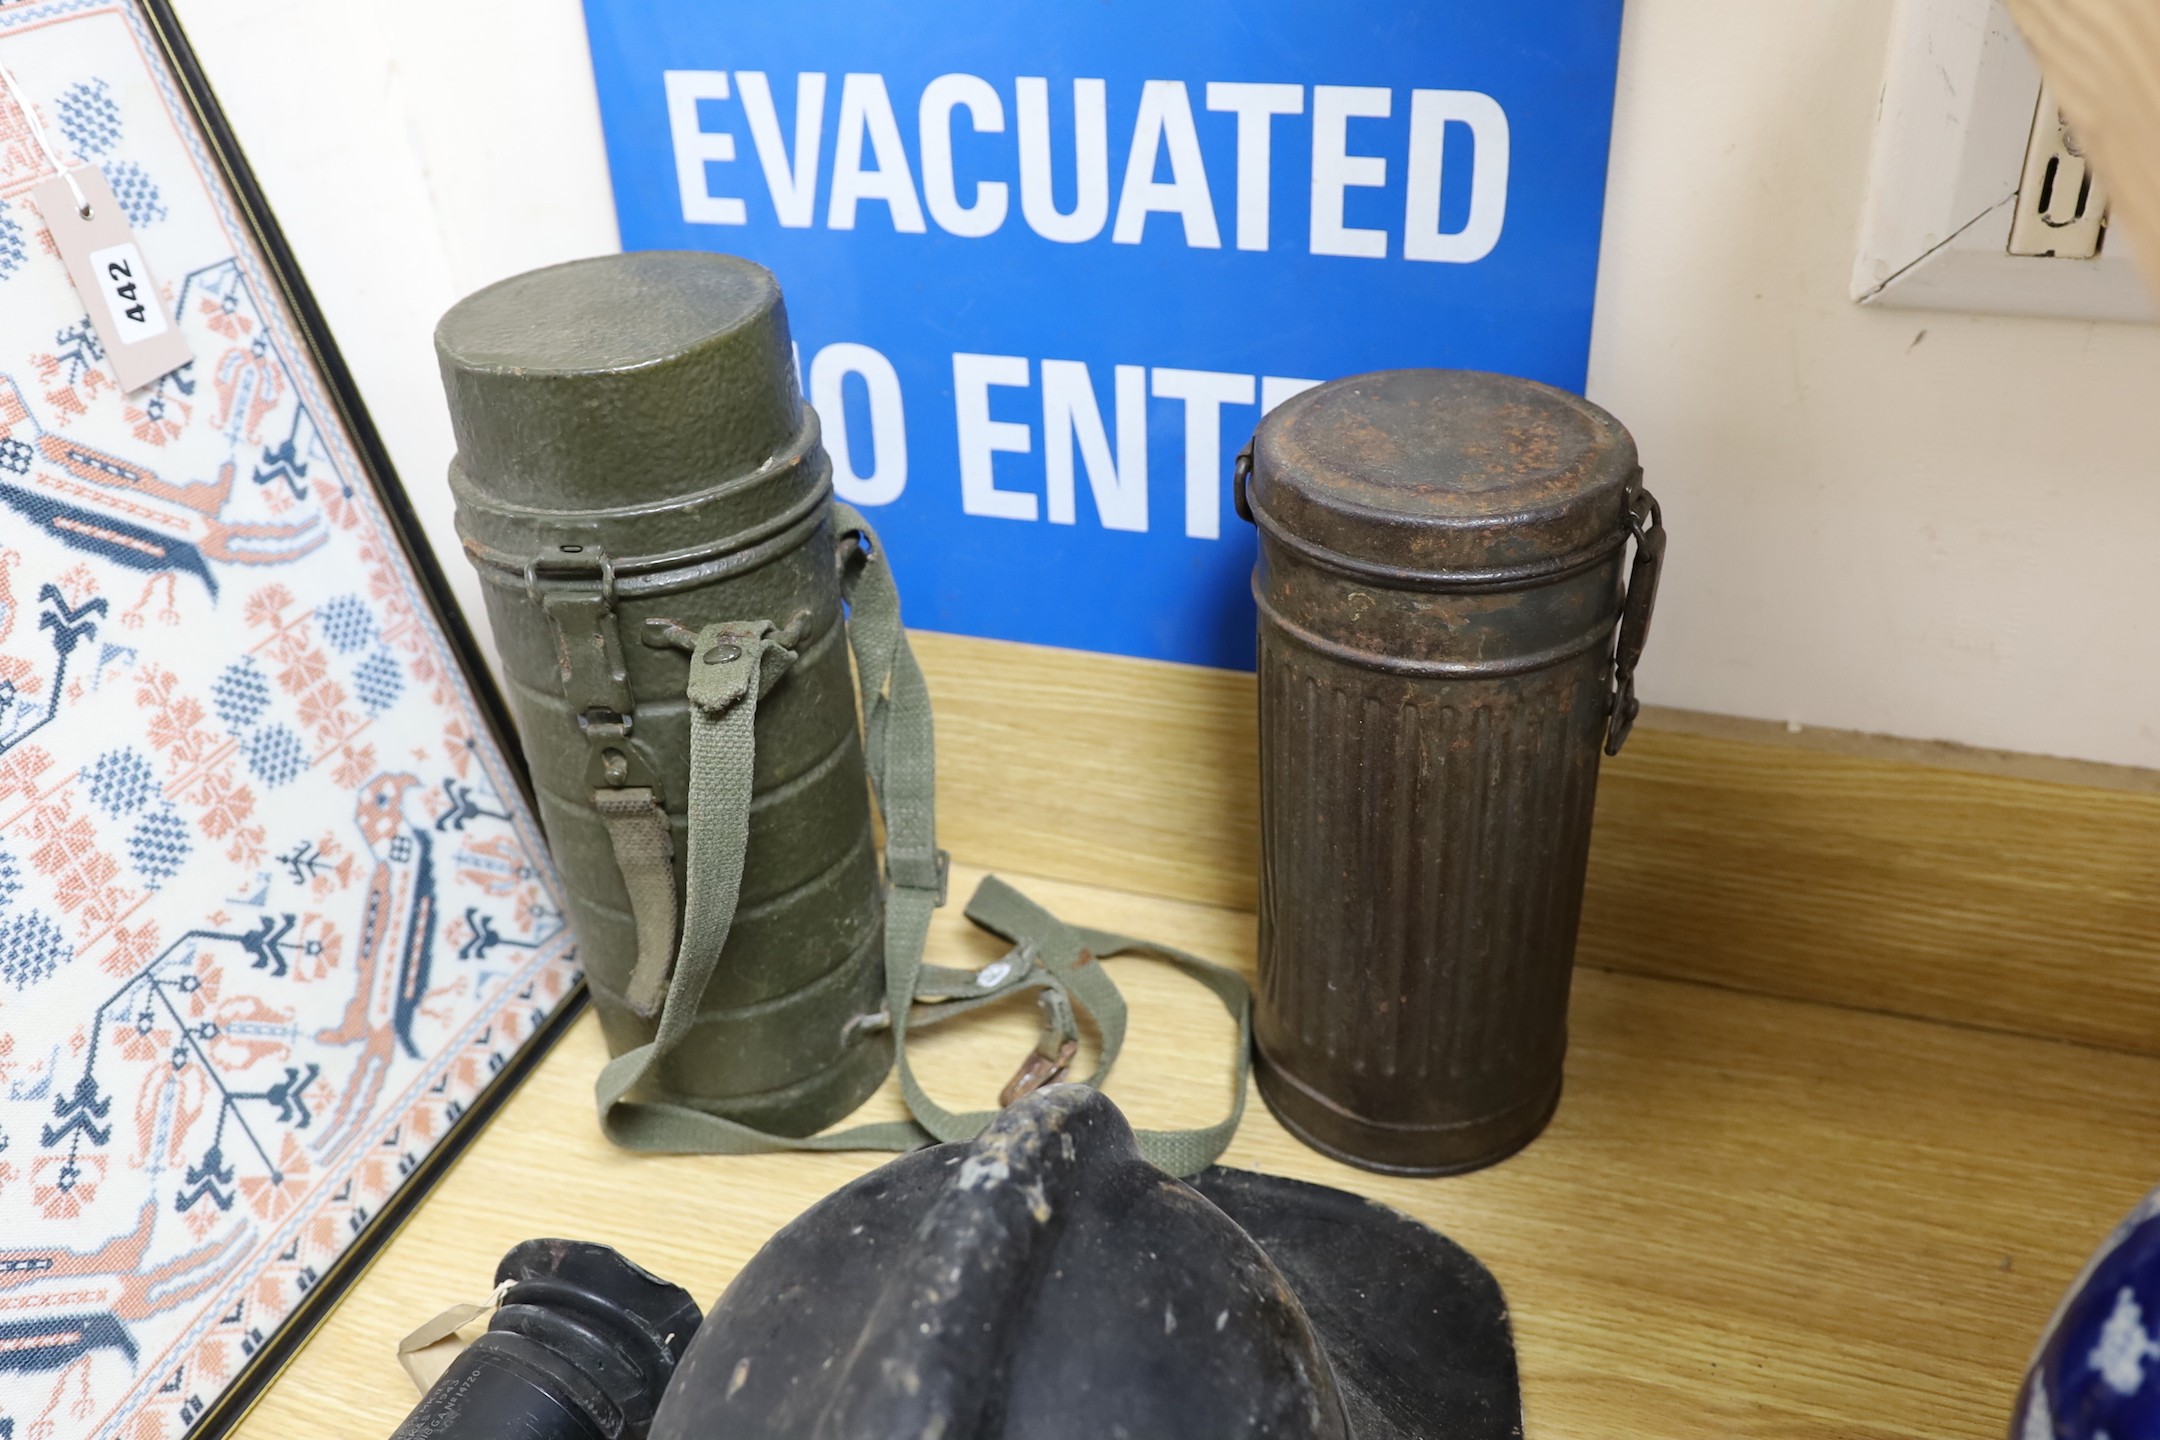 A WW2 gas mask in original metal case, together with other related ephemera, including an enamelled sign, a fire brigade hat, etc.